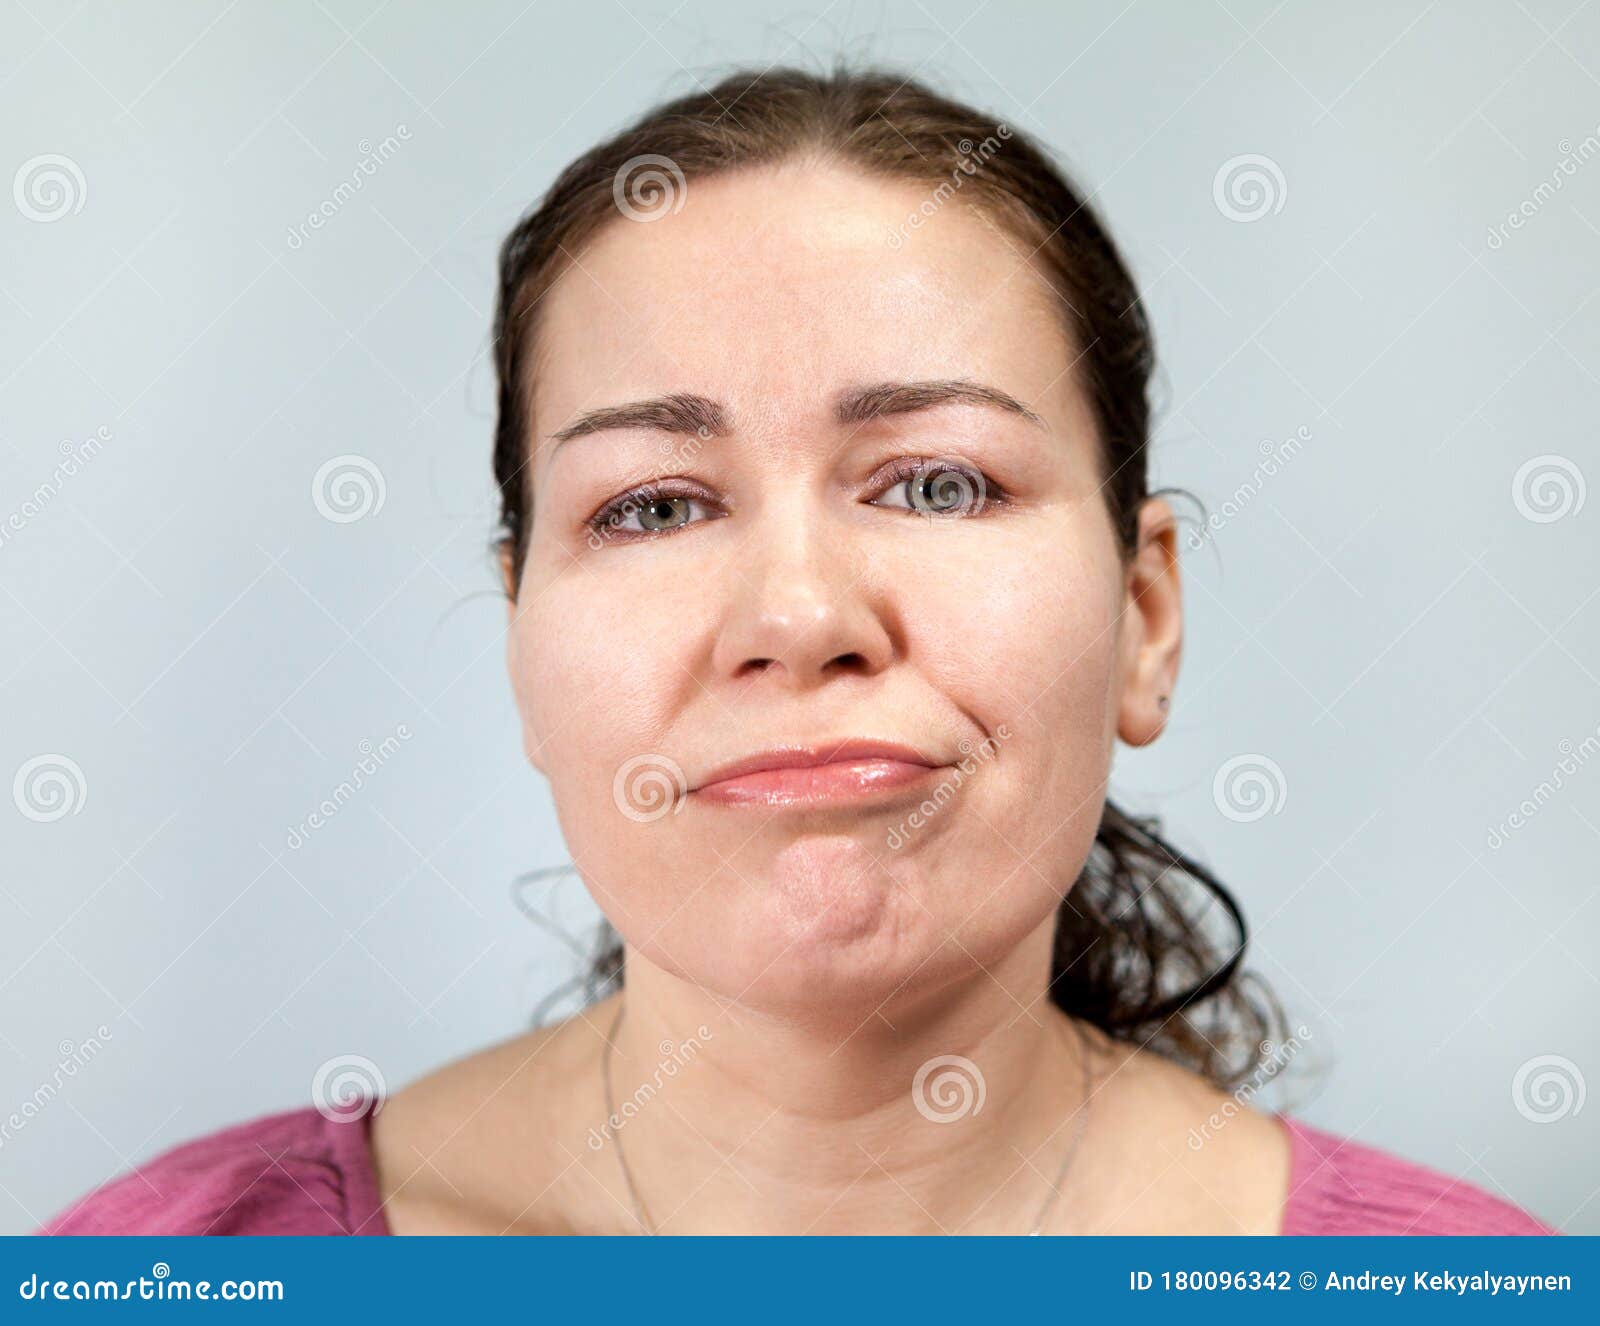 apathy and laziness on the face of an adult woman, portrait on grey background, emotions series